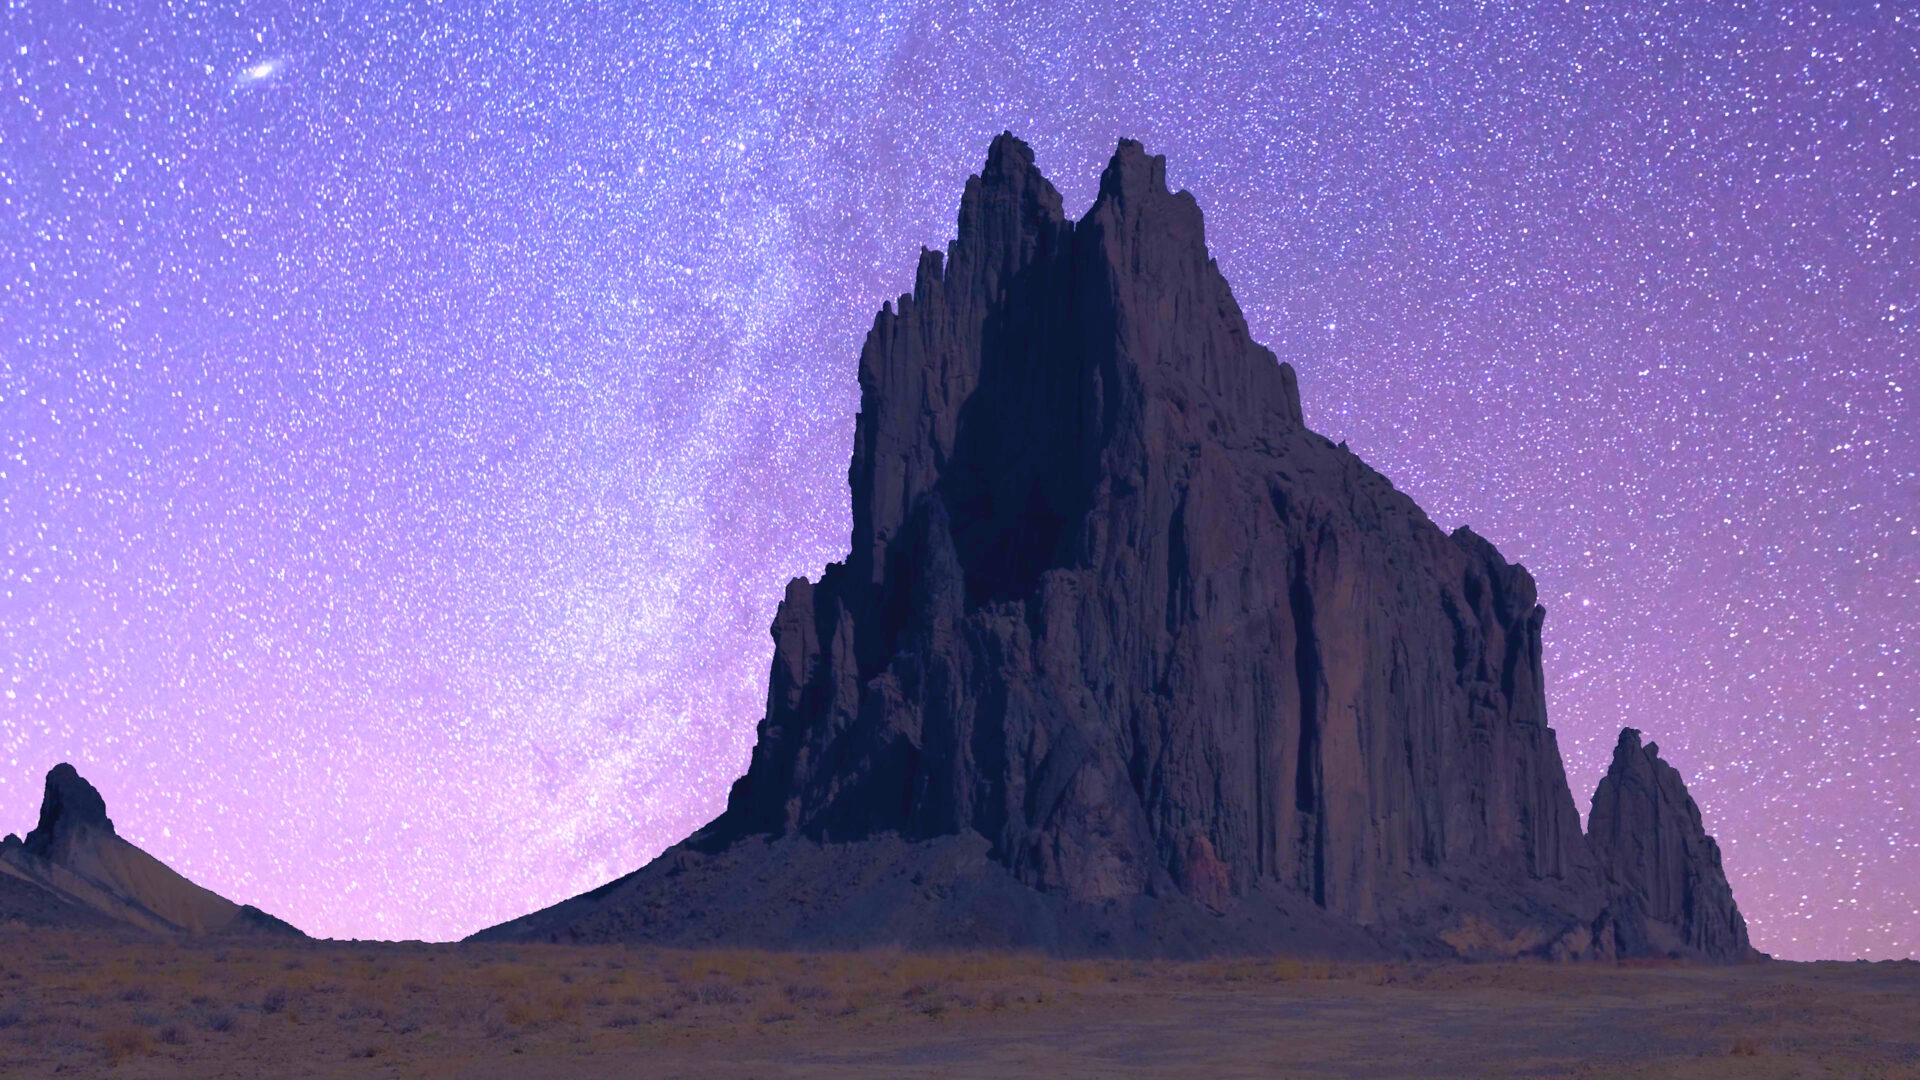 Shiprock. New Mexico. A rock formation in the desert with a starry sky.